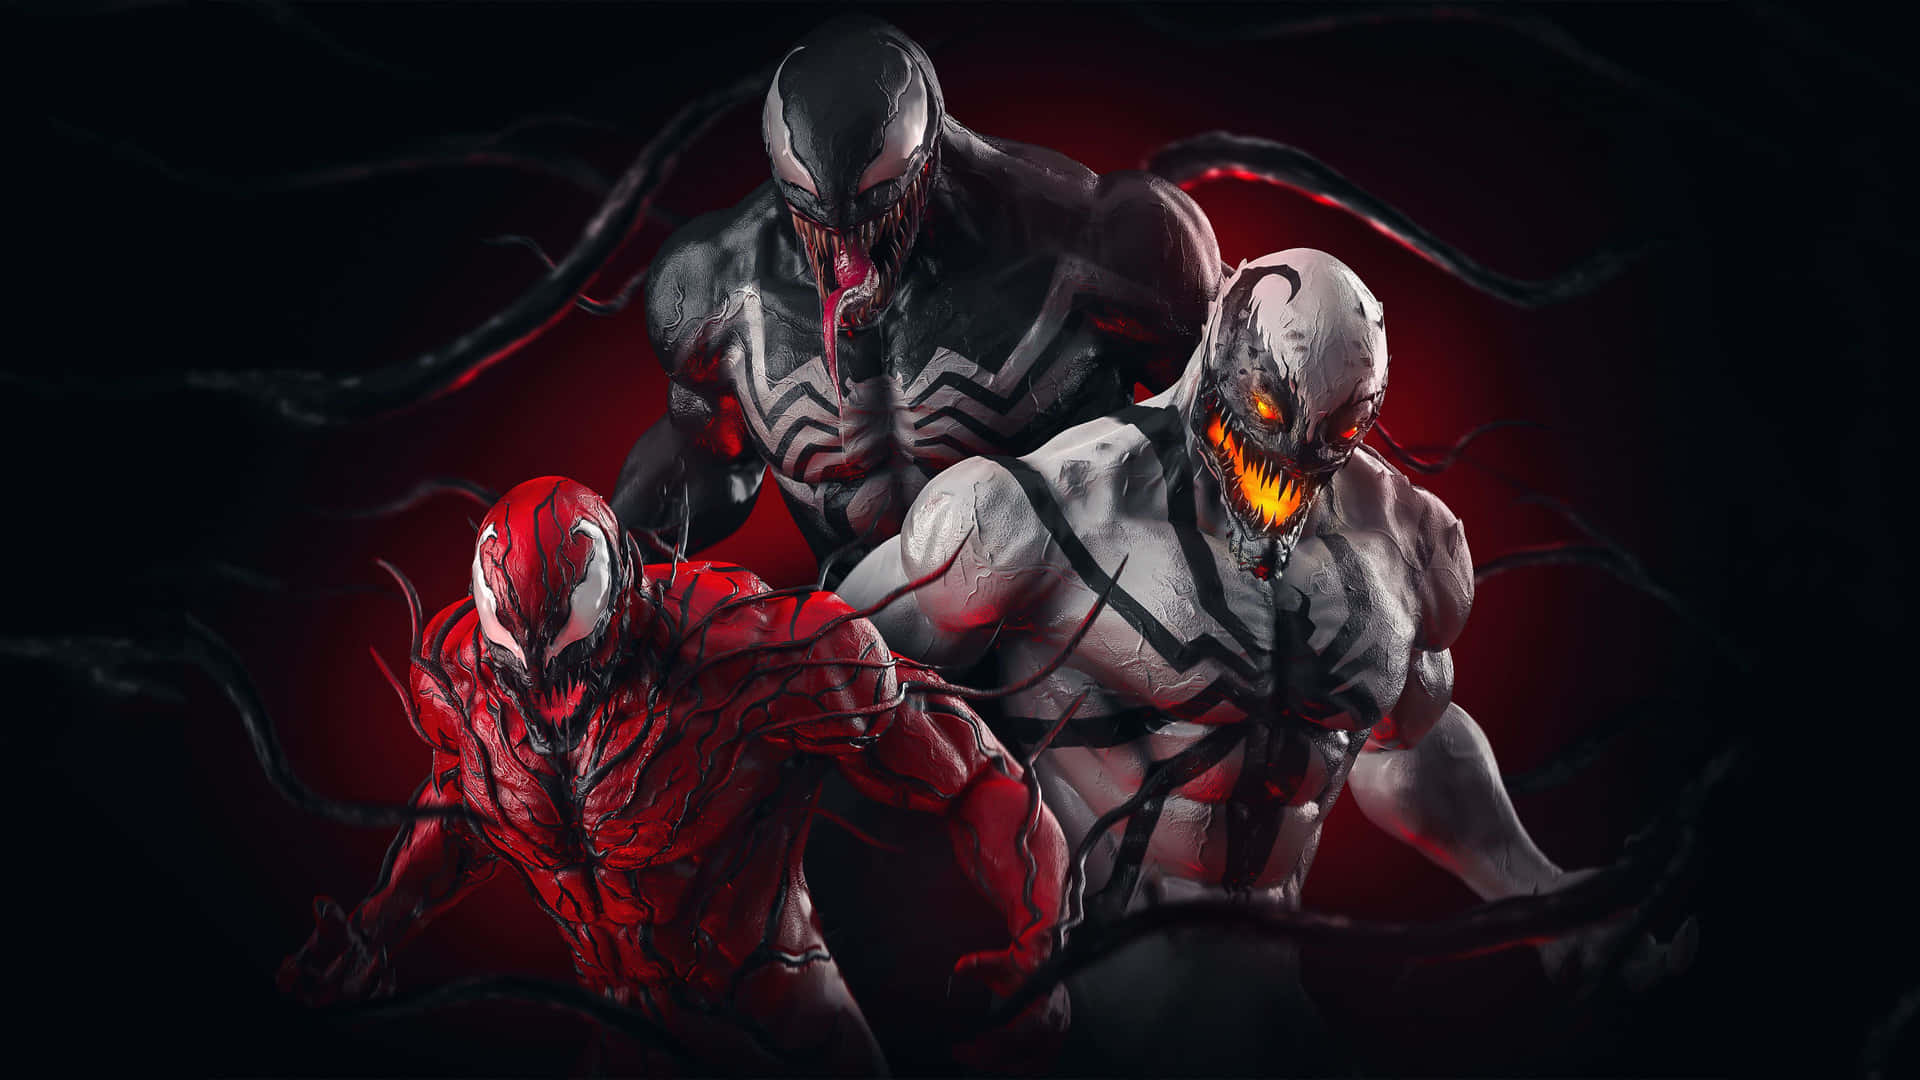 Carnage Unleashed - A Fierce and Menacing Marvel Villain